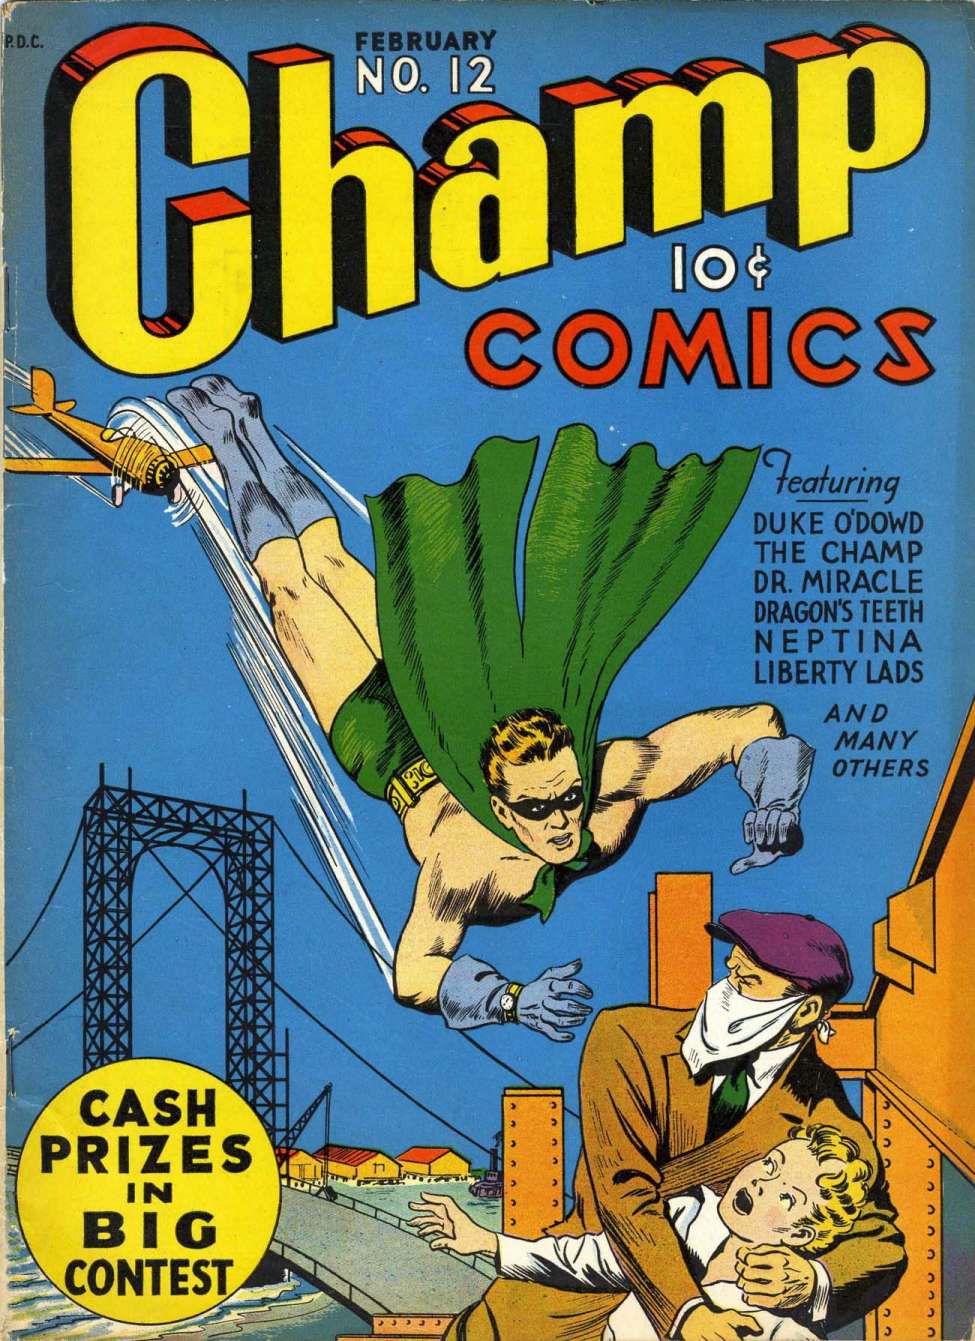 Book Cover For Champ Comics 12 - Version 1